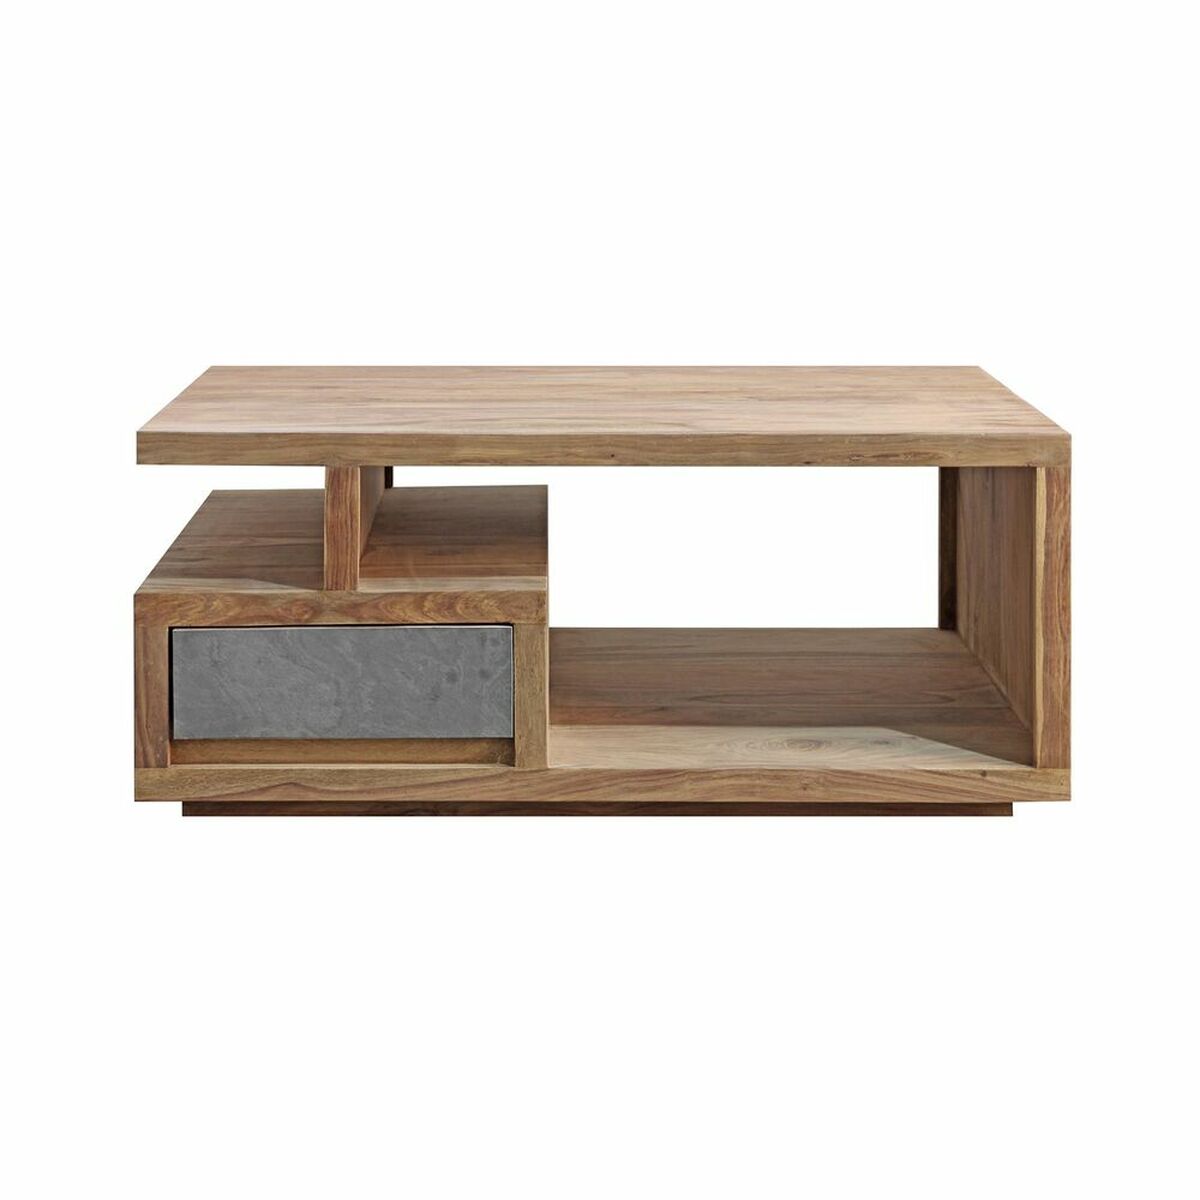 Centre Table DKD Home Decor 118 x 70 x 45 cm Natural Grey Wood